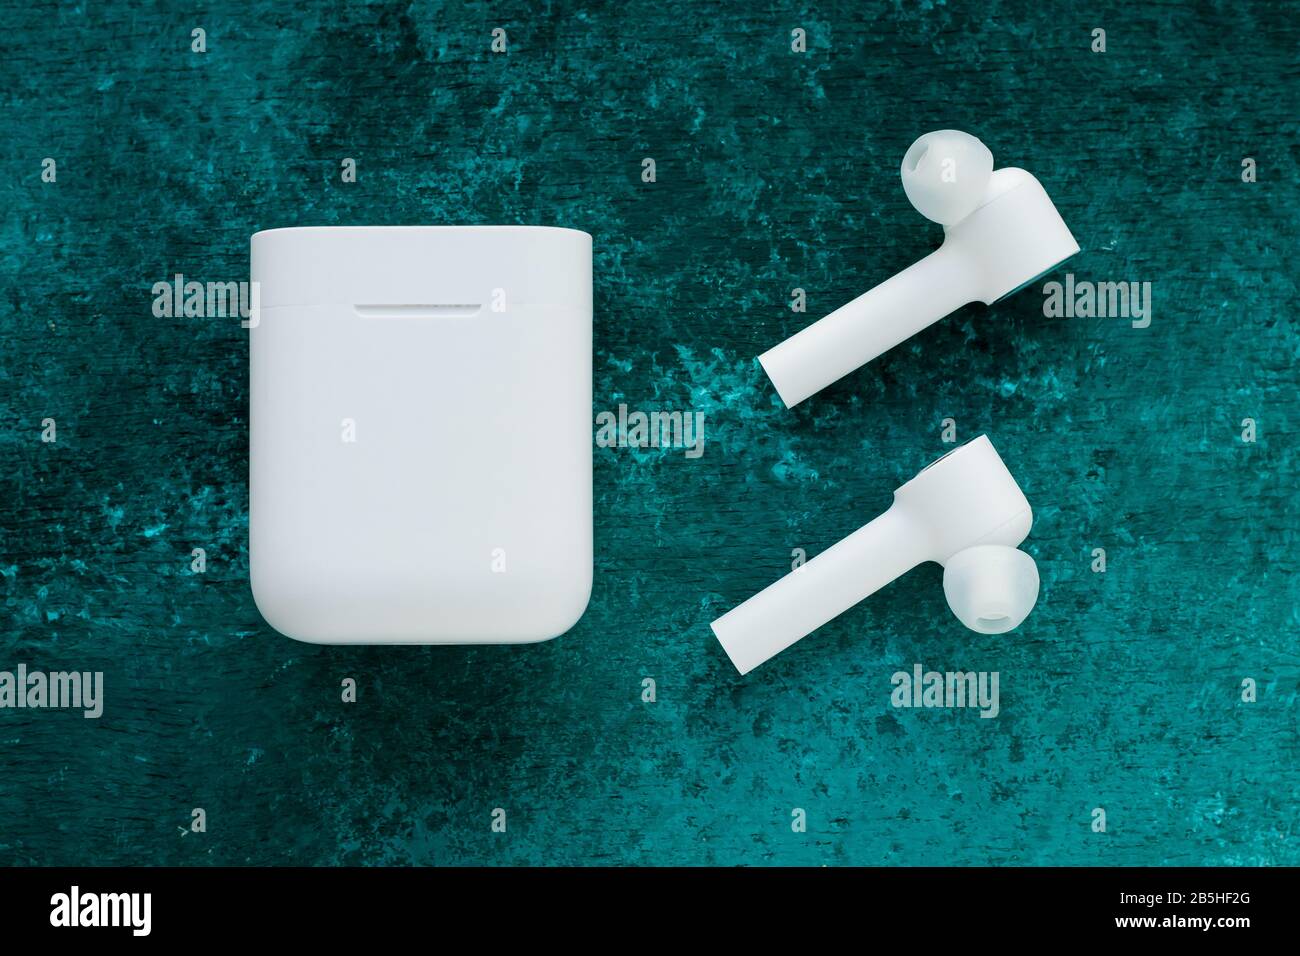 Wireless bluetooth white earphones with charging case on green painted grunge background. Gadget for listen a music. Electronic device Stock Photo